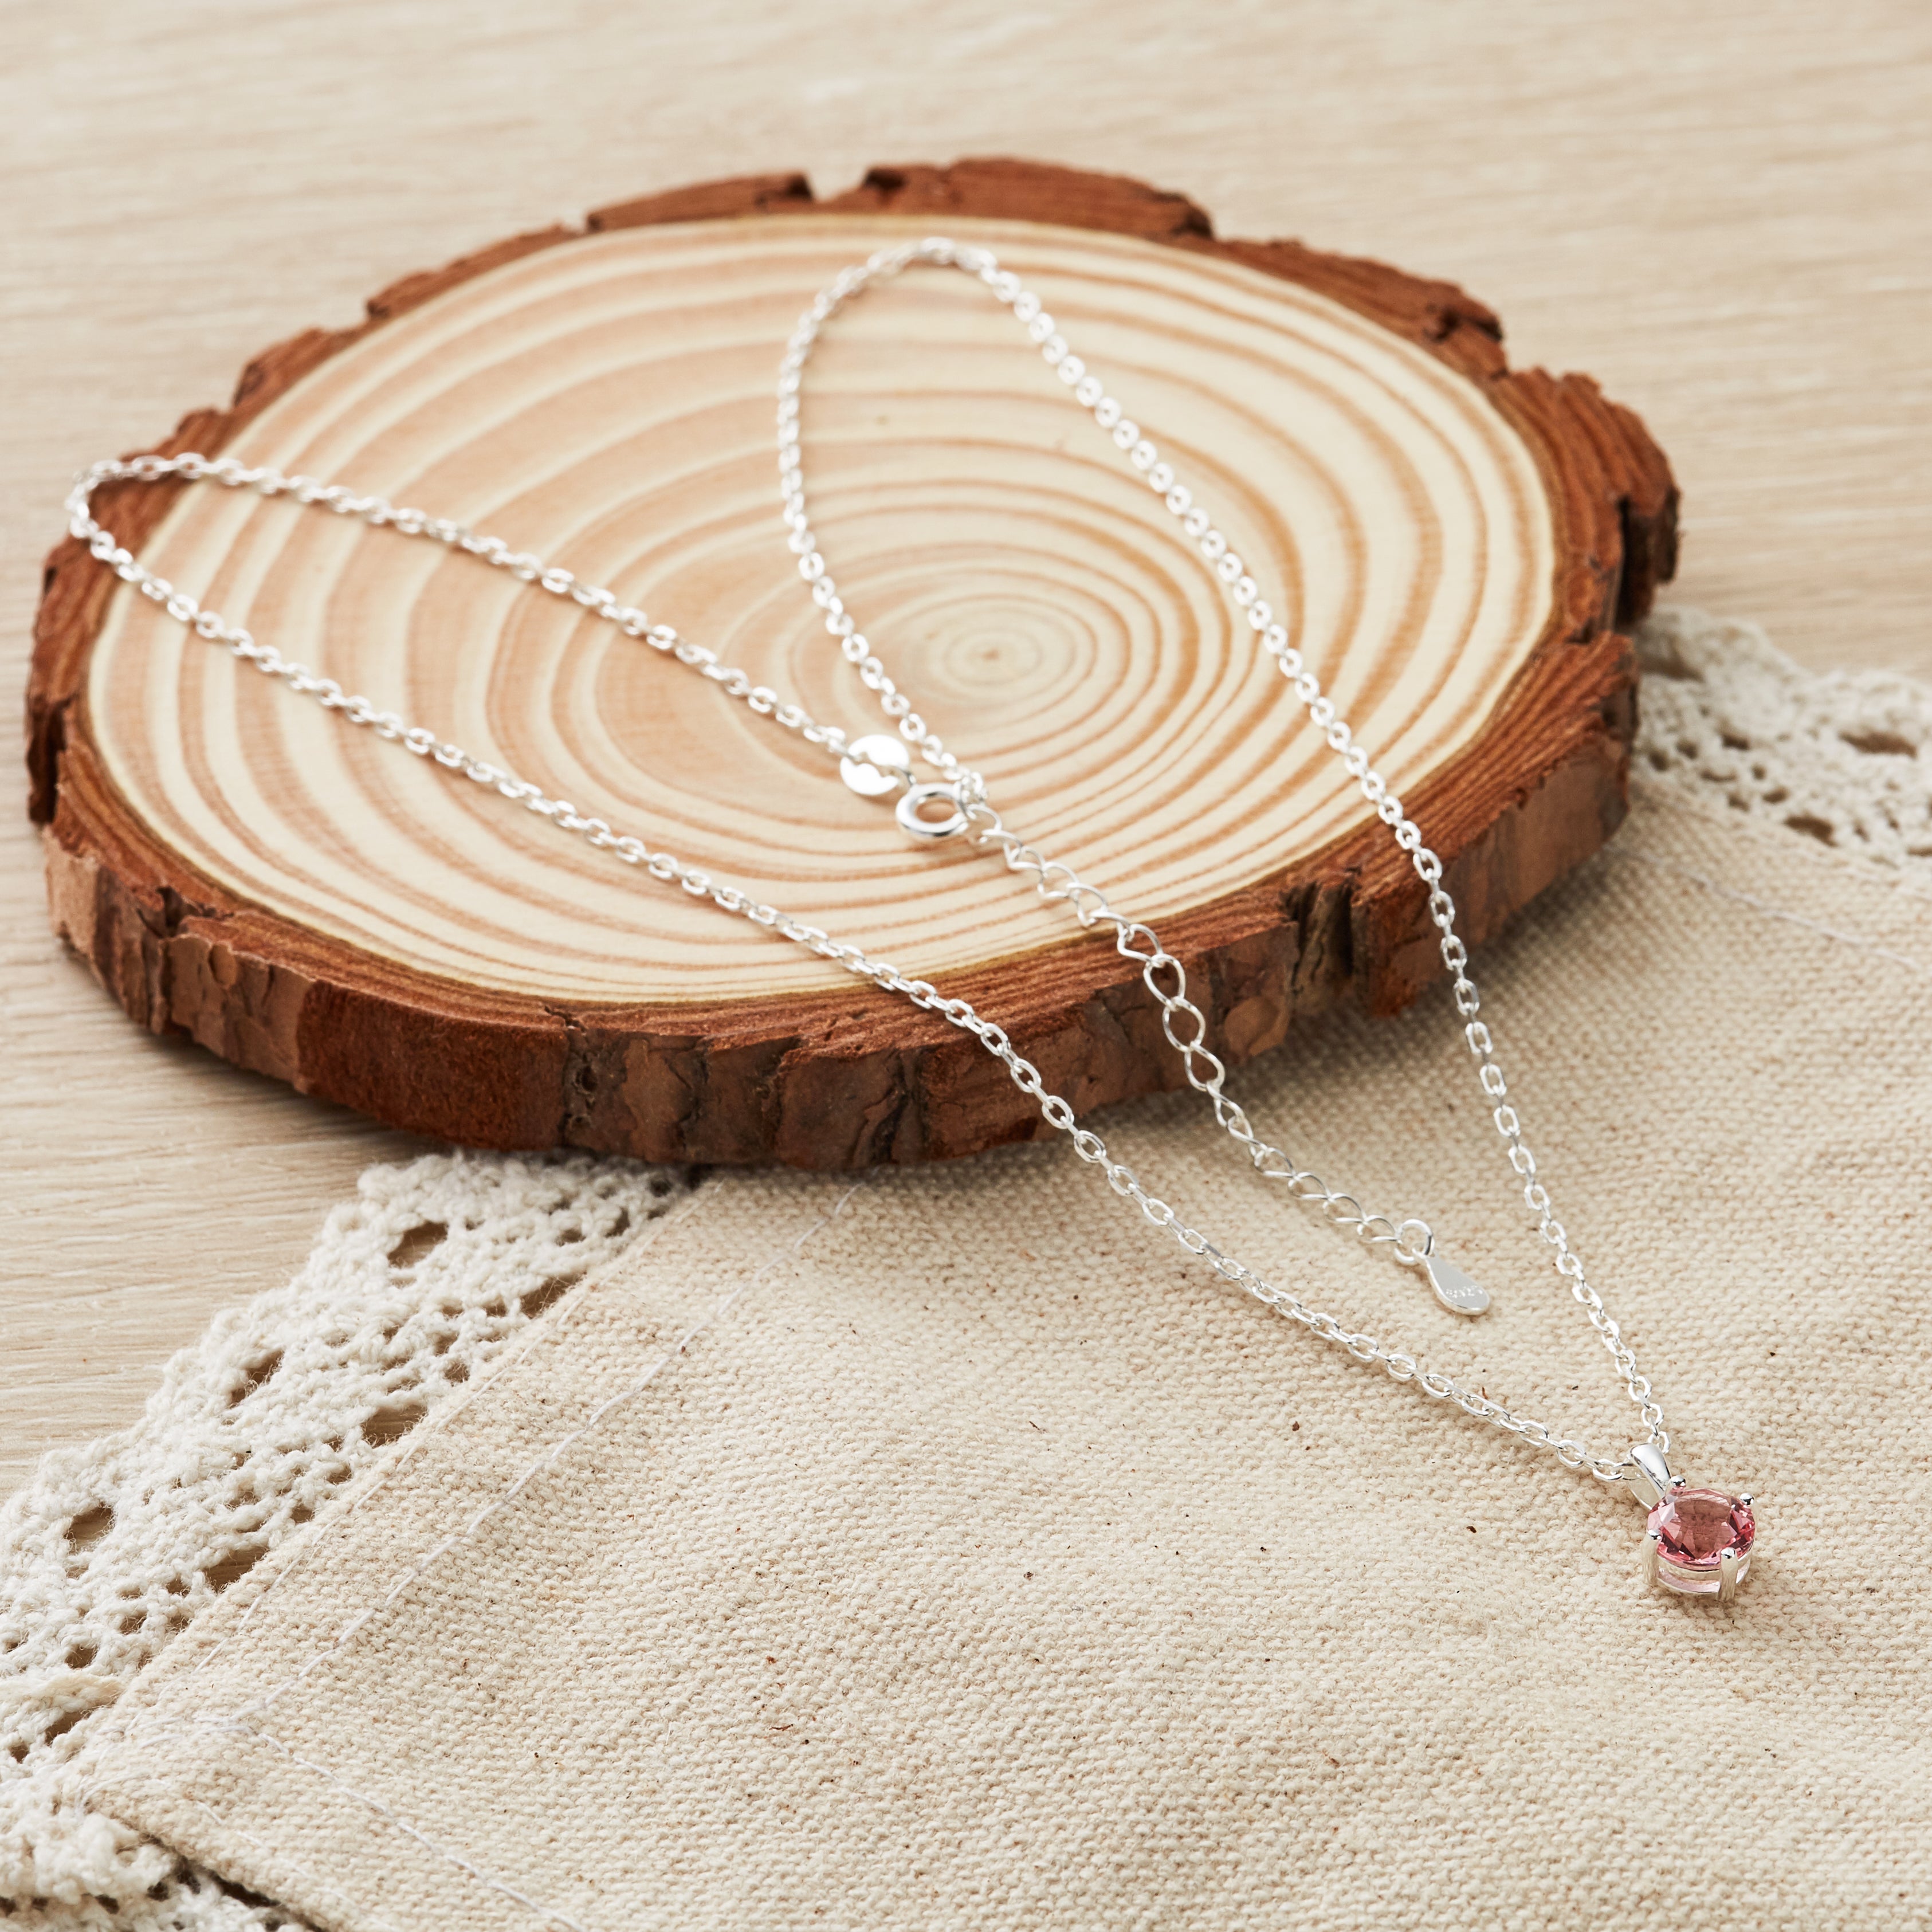 Sterling Silver October (Tourmaline) Birthstone Necklace Created with Zircondia® Crystals